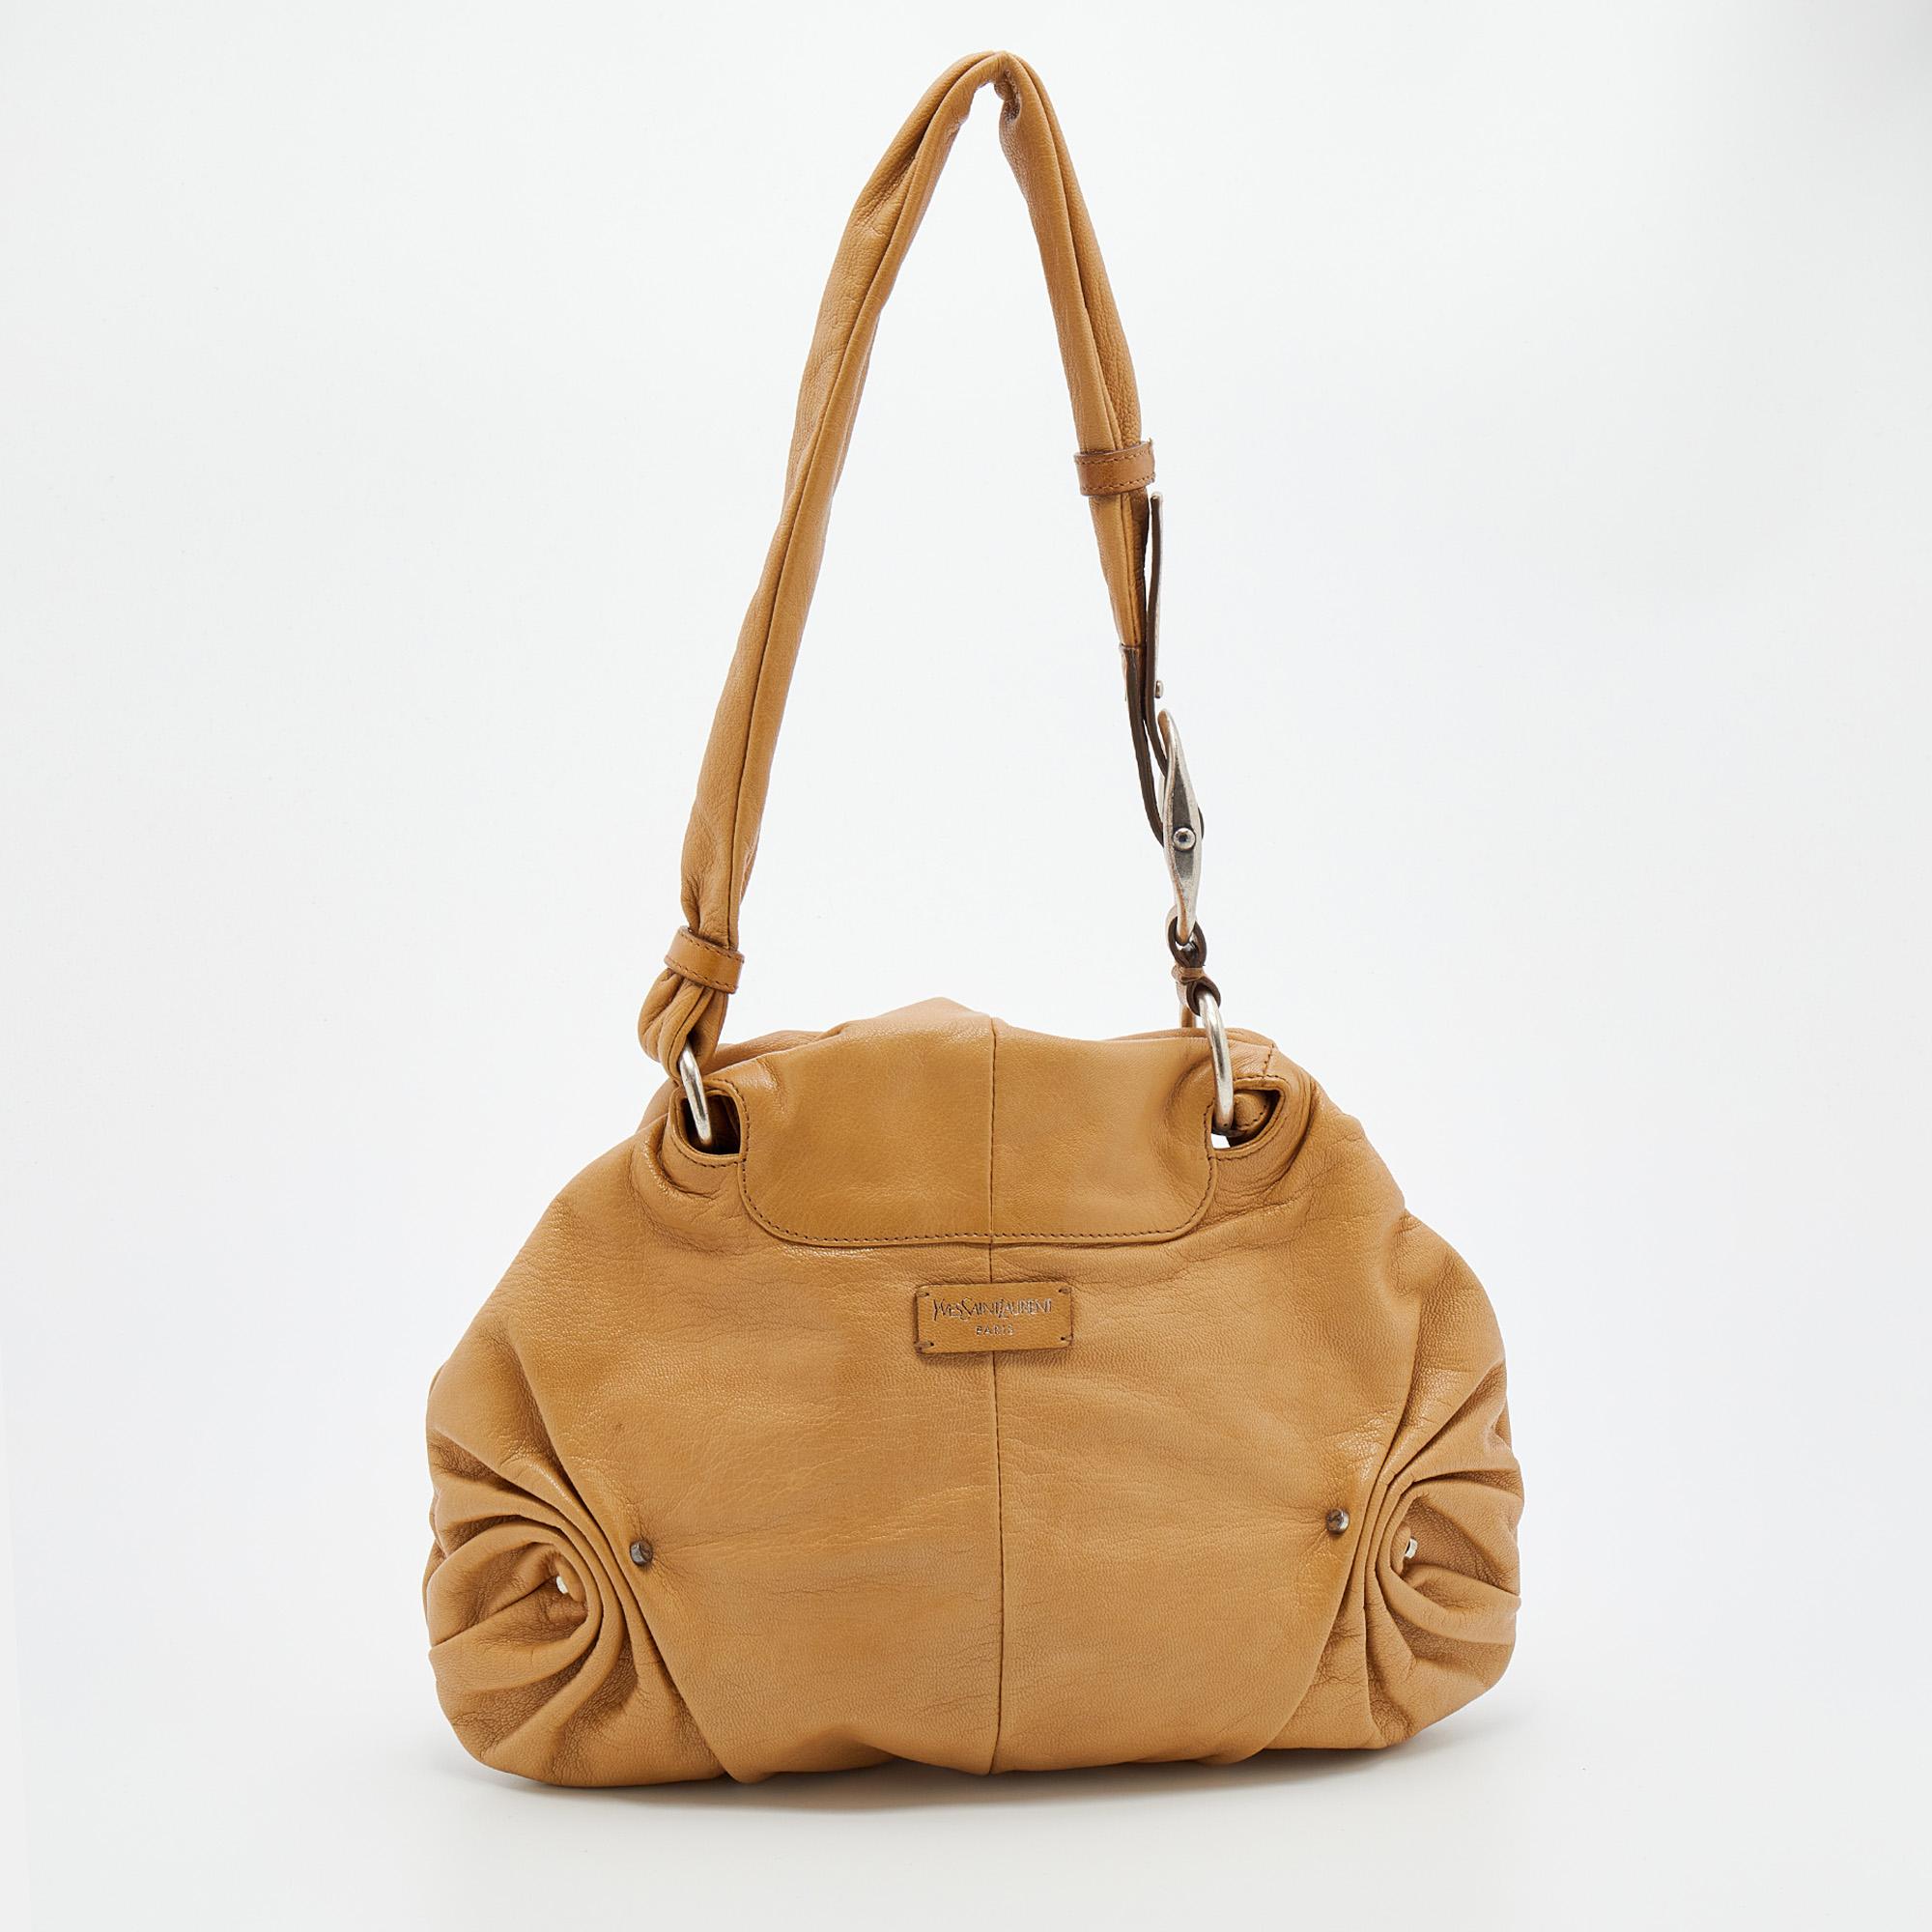 The gathered detailing enhances the silhouette of this Yves Saint Laurent bag. Crafted from tan leather, it is held by a single handle at the top, and its satin interior is spaciously sized.

Includes: Info Booklet